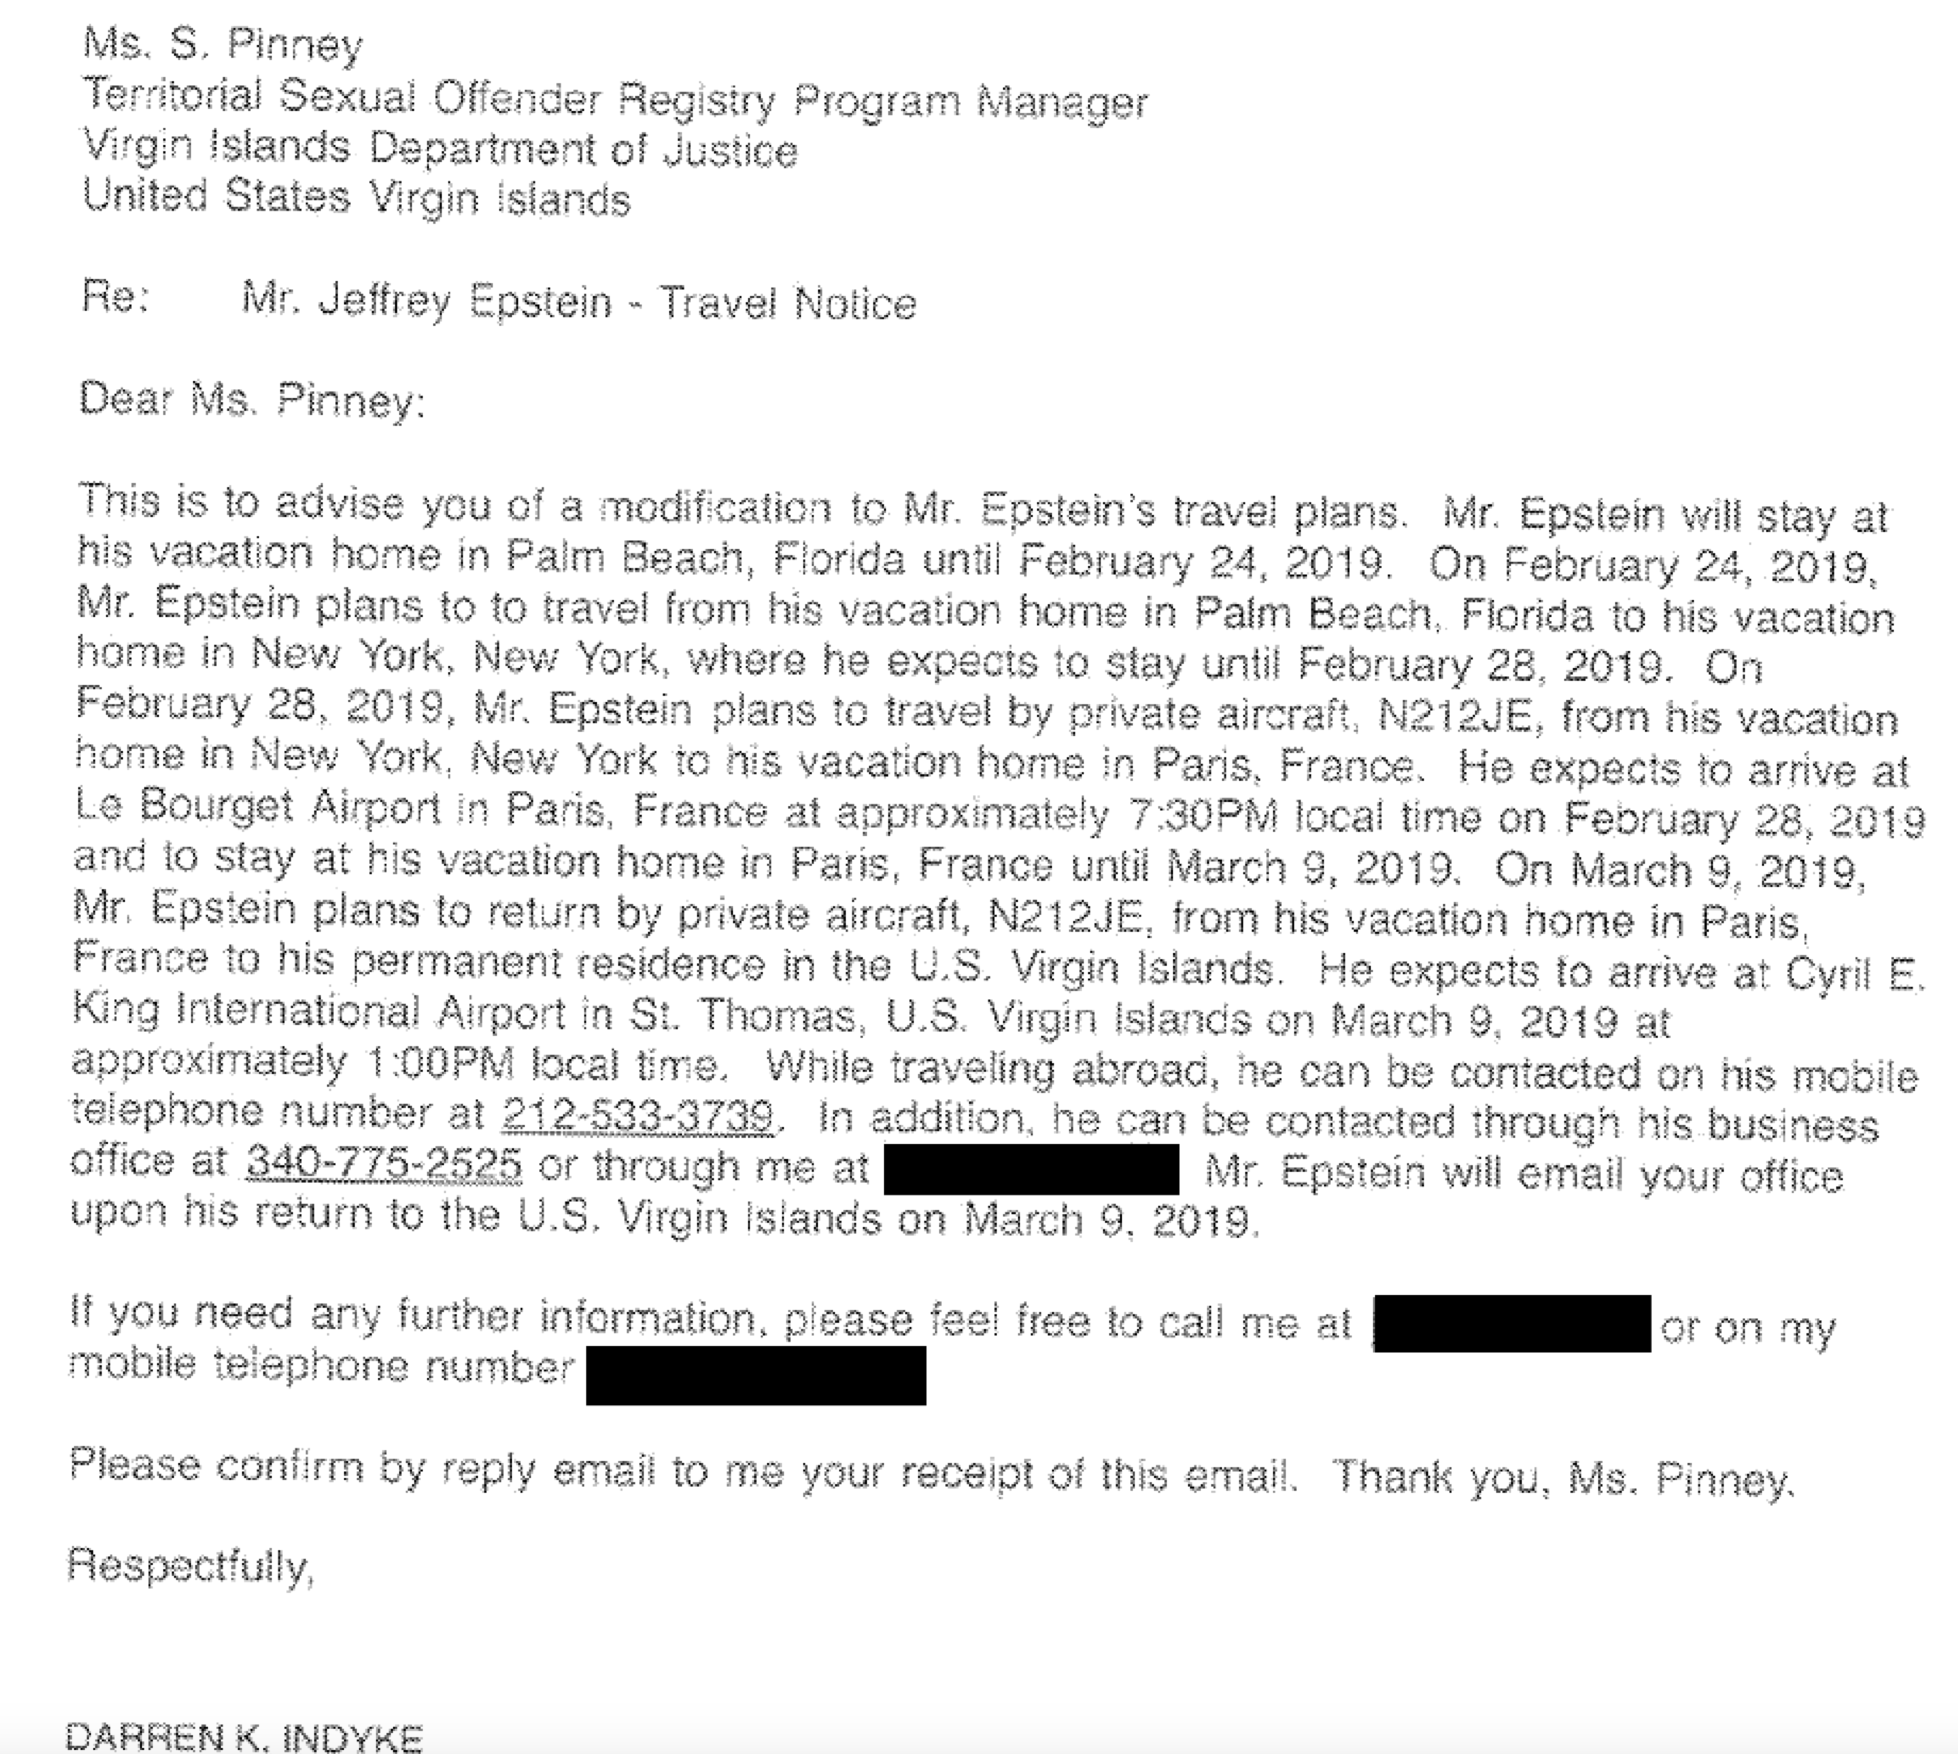 An email from Jeffrey Epstein's attorney to the V.I. Justice Department is an example of how he reported his travel plans to authorities. (Screenshot of exhibit)